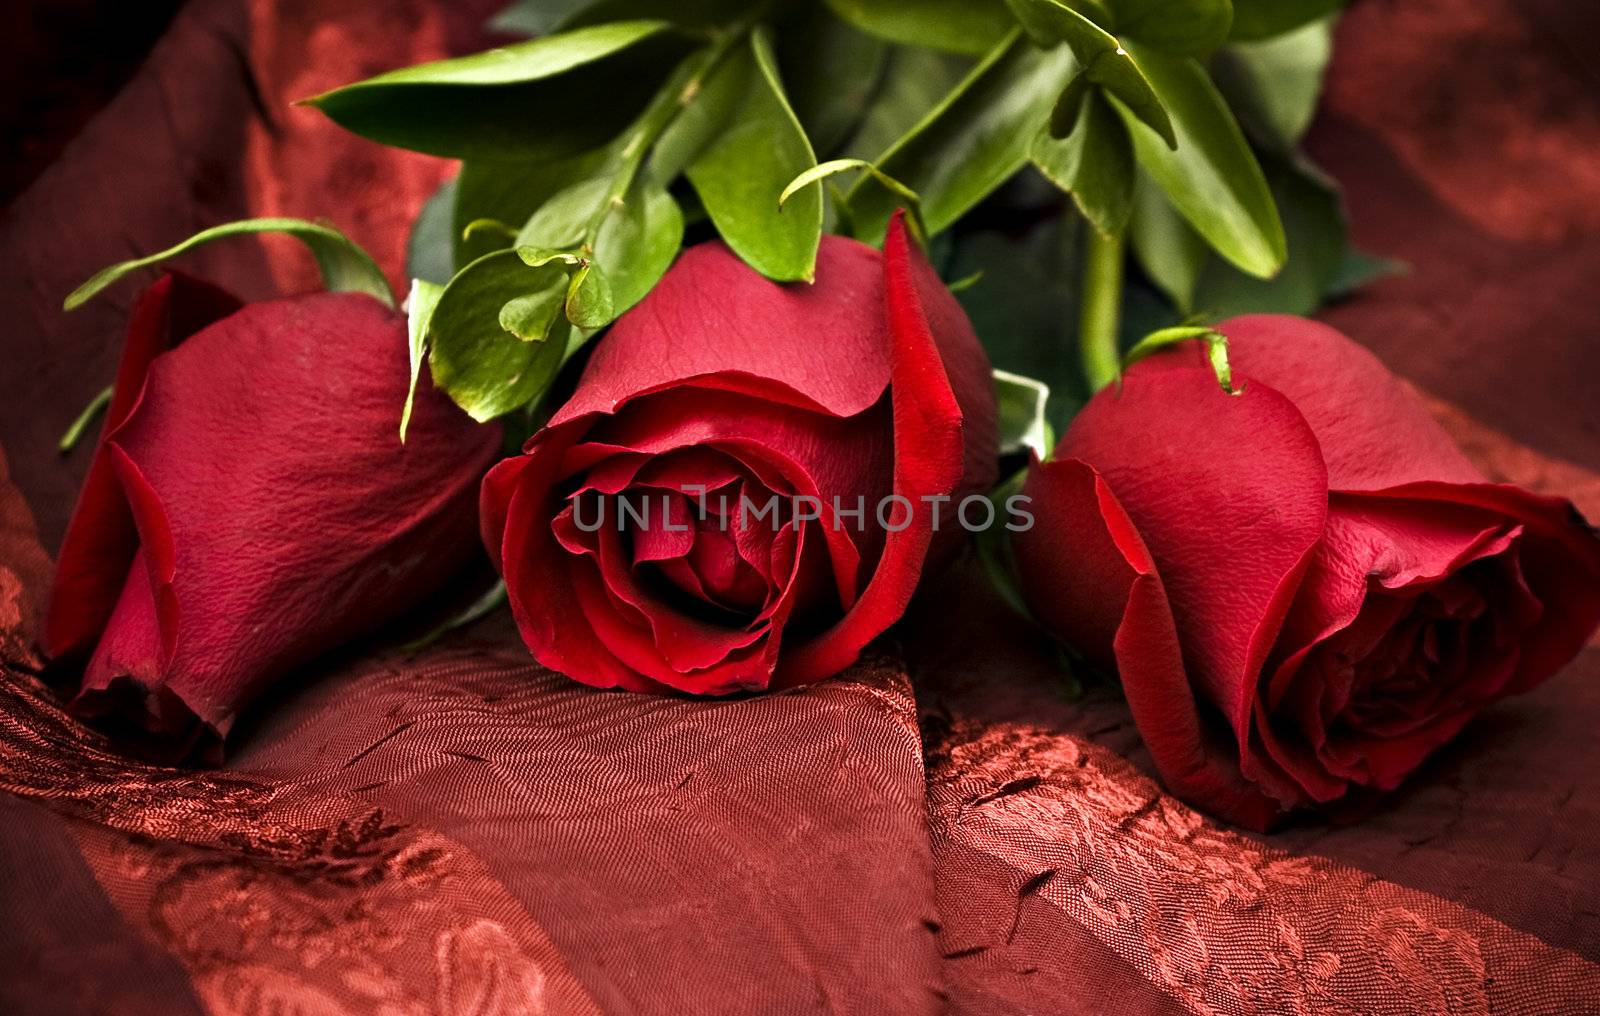 Three beautiful red roses against a red background

